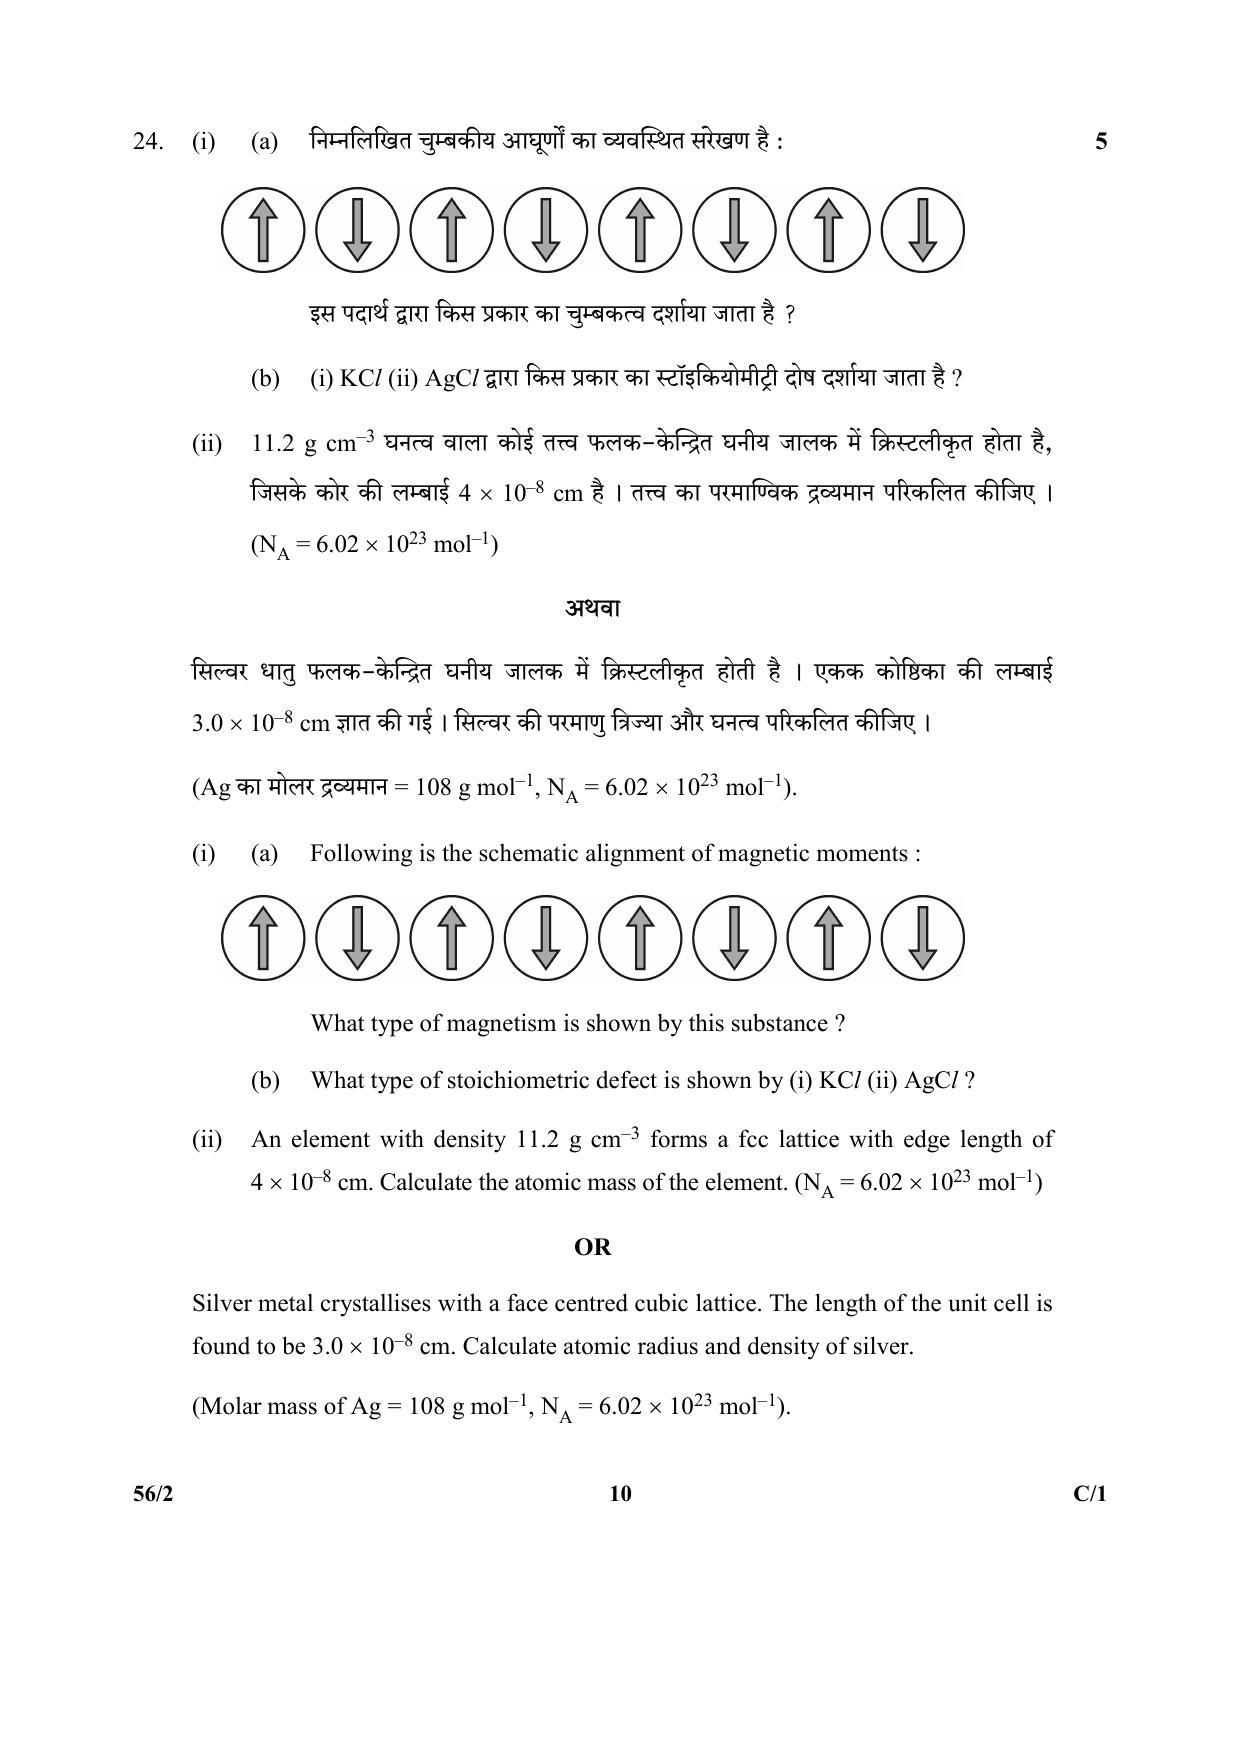 CBSE Class 12 56-2 (Chemistry) 2018 Compartment Question Paper - Page 10